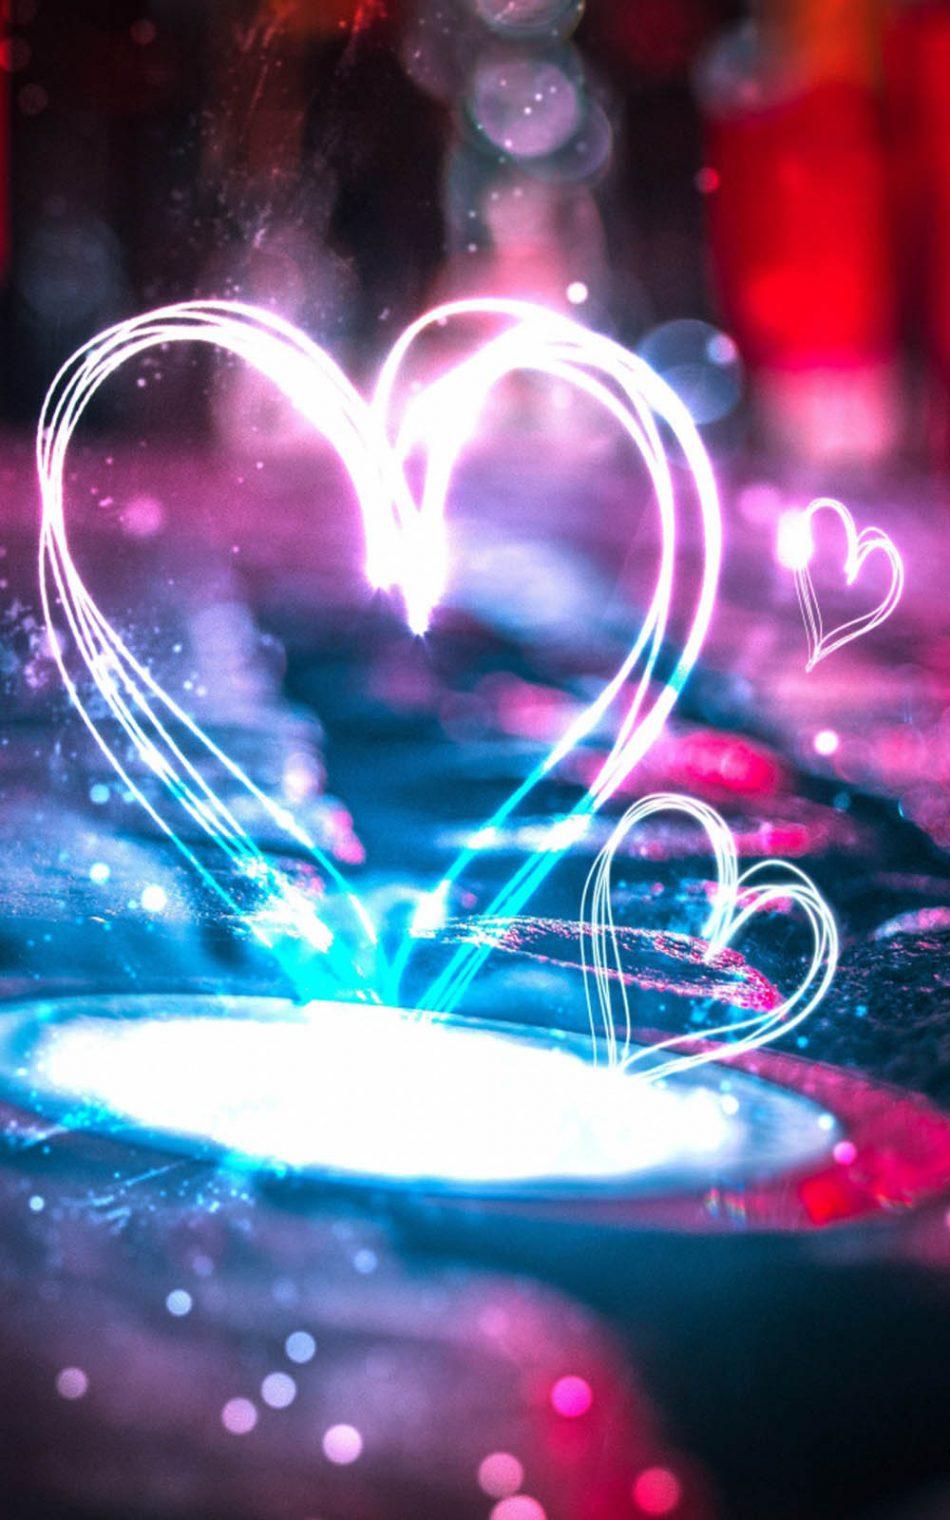 Free download Download Heart Shape Lights Pure 4K Ultra HD Mobile Wallpaper [950x1520] for your Desktop, Mobile & Tablet. Explore Mobile Wallpaper HD. Free Wallpaper for Cell Phones, Best